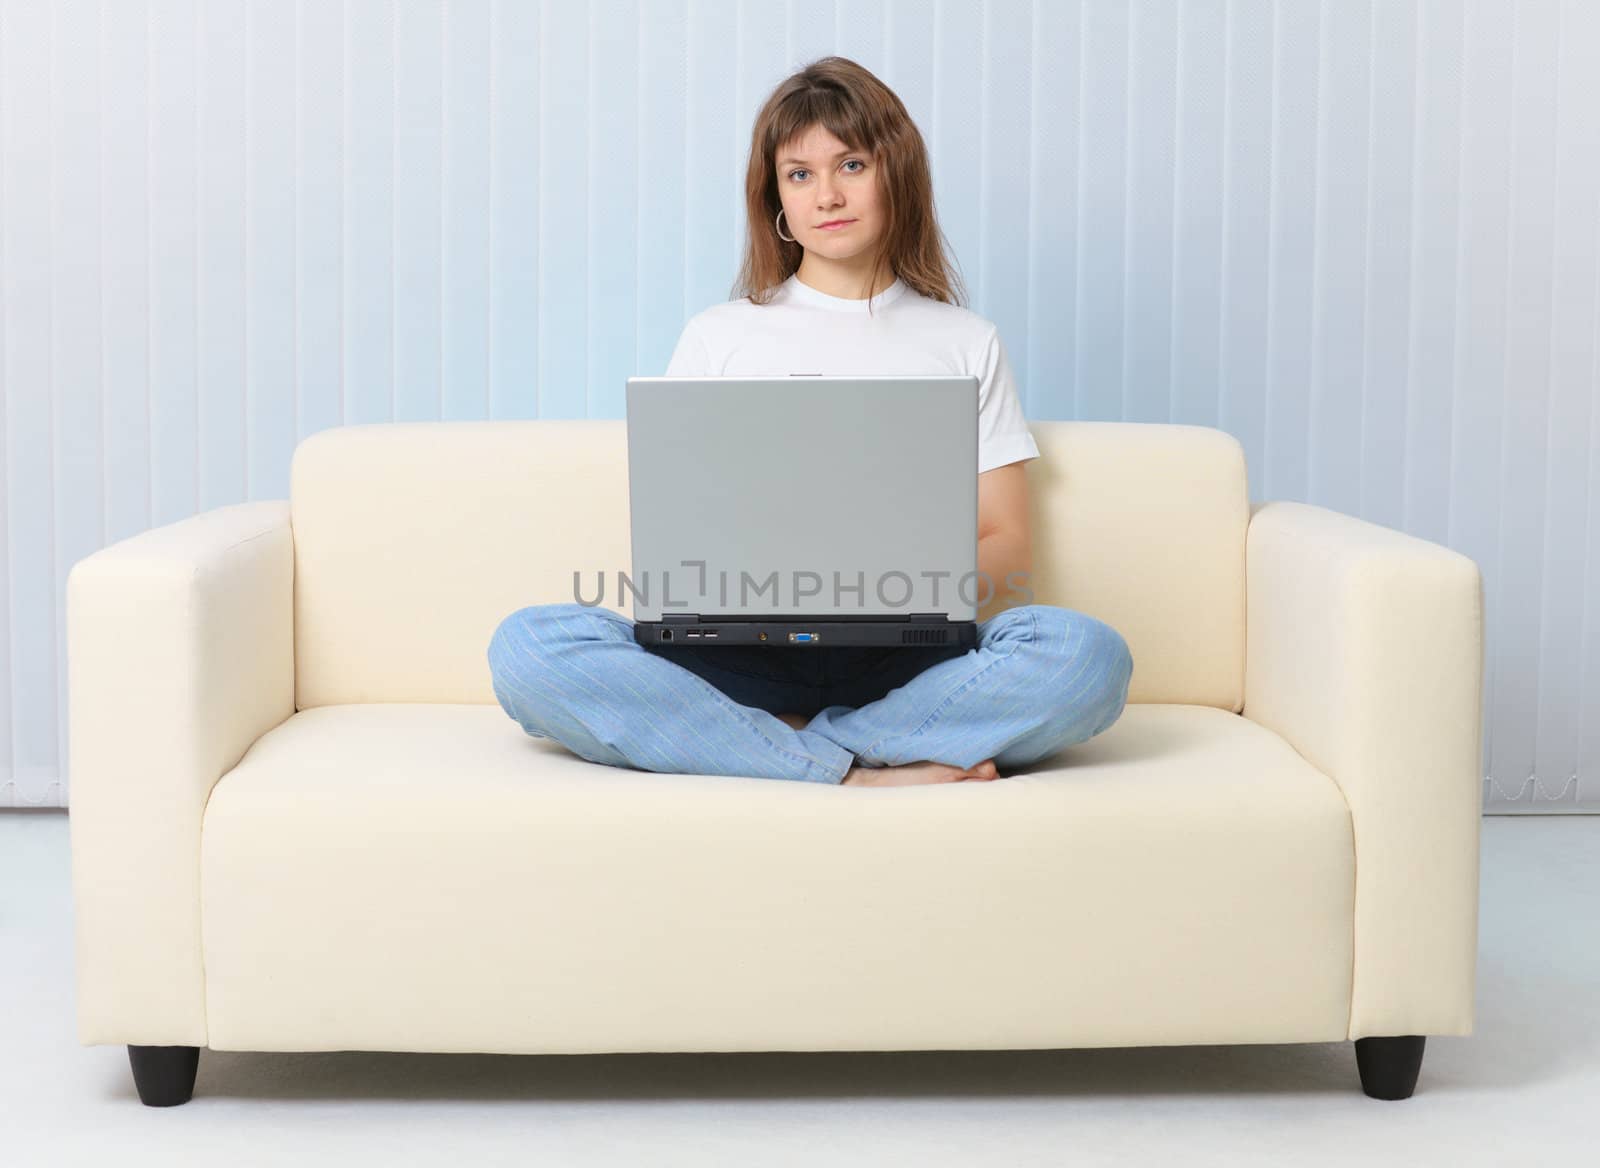 Beauty is sitting on the couch with a laptop